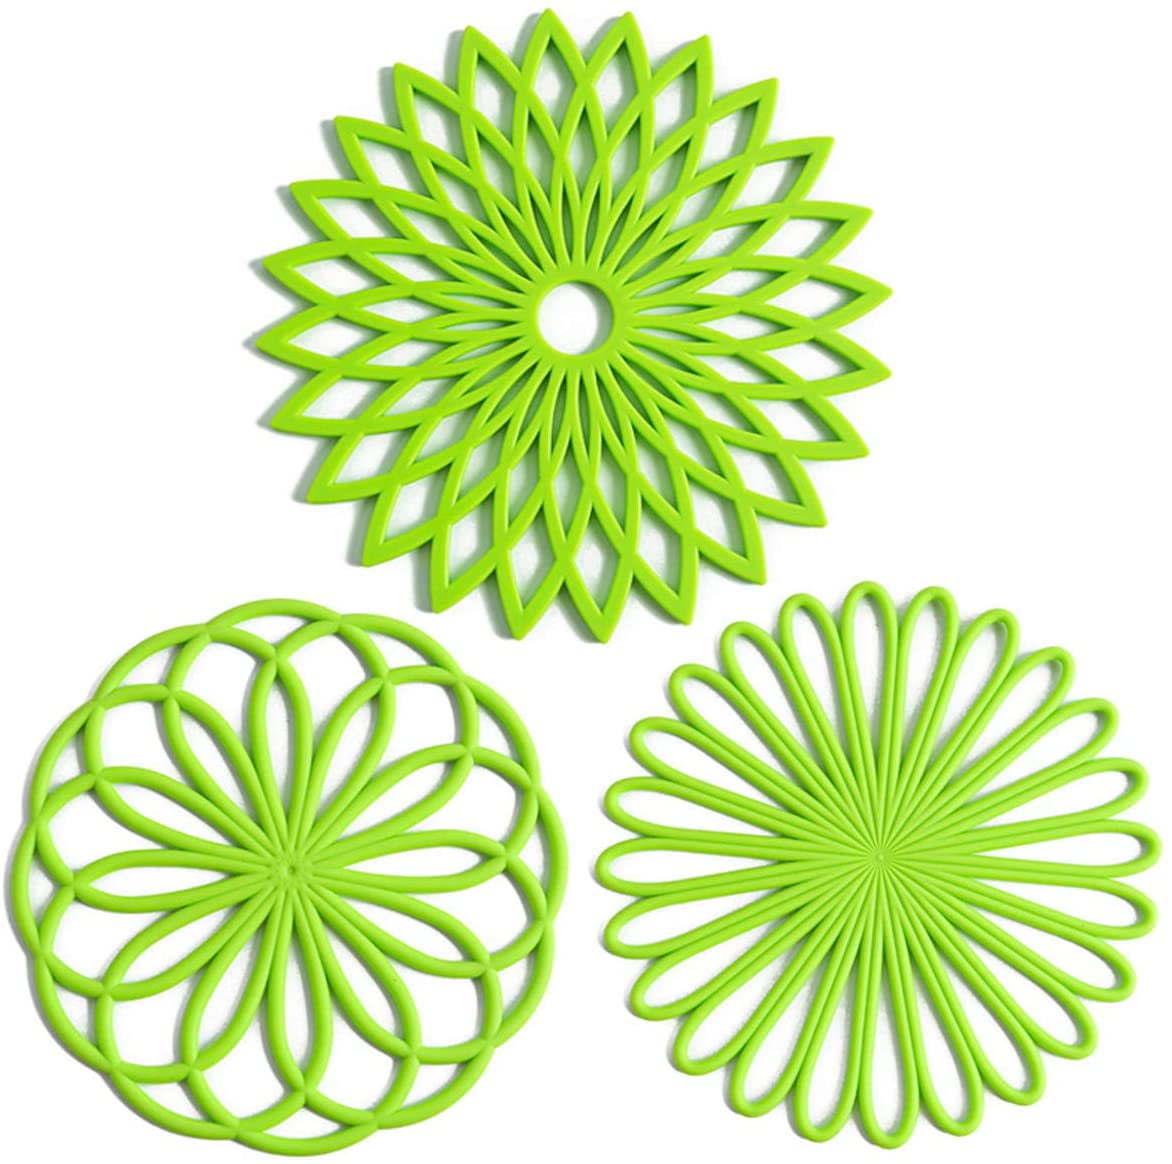 set of 3 Pack Light green Premium Quality Insulated Flexible Durable Non Slip Hot Pads and Coasters Cup Silicone Multi-Use Flower Trivet Mat